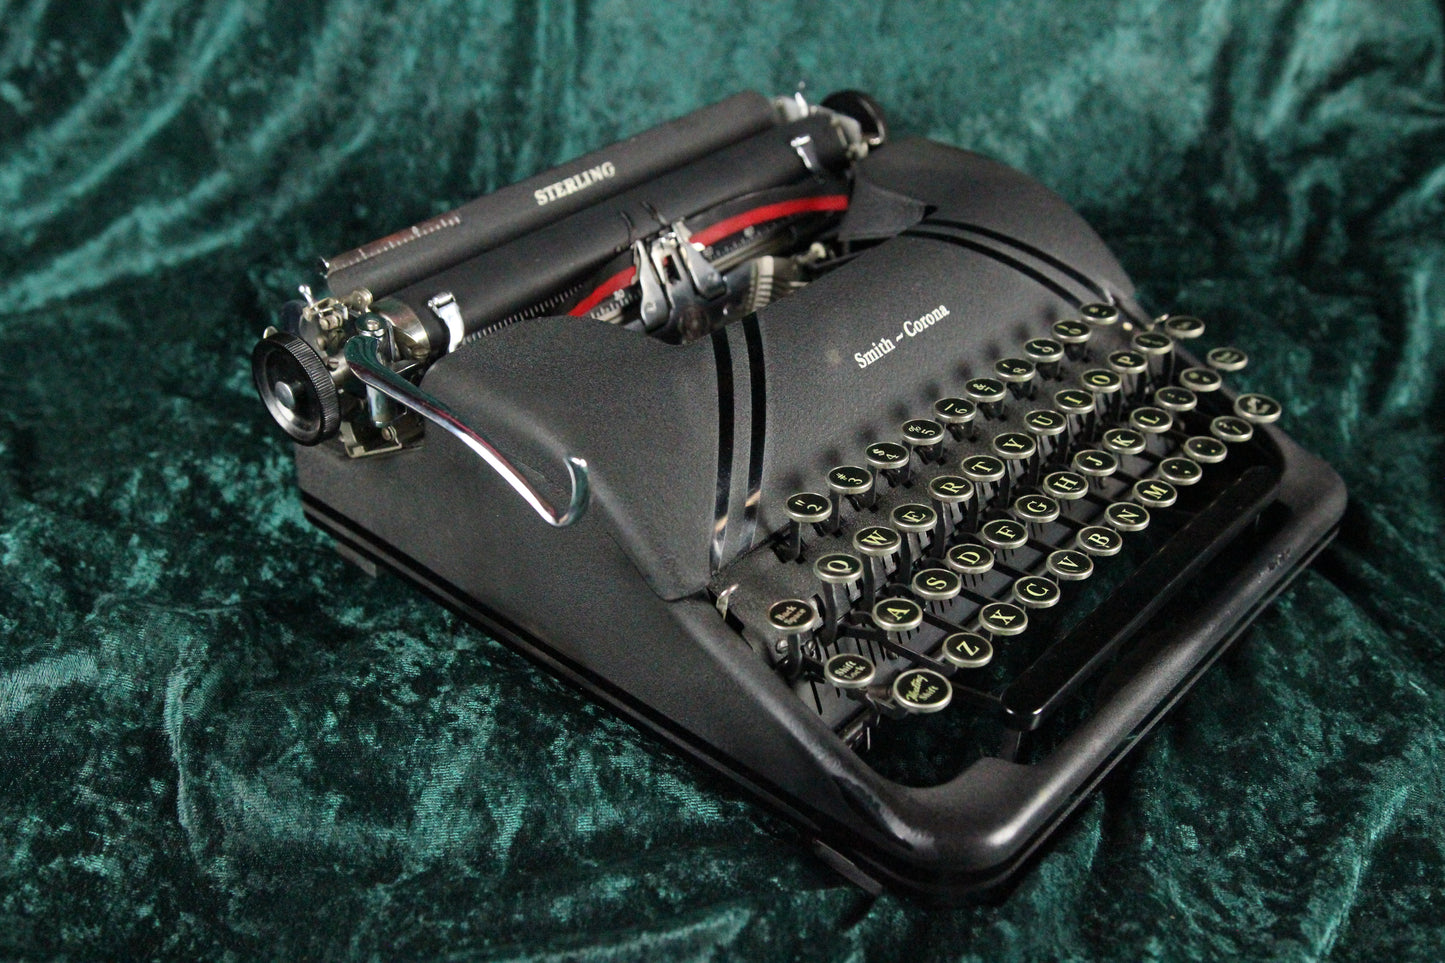 Smith Corona Sterling 4A Series Portable Manual Typewriter with Case, 1946